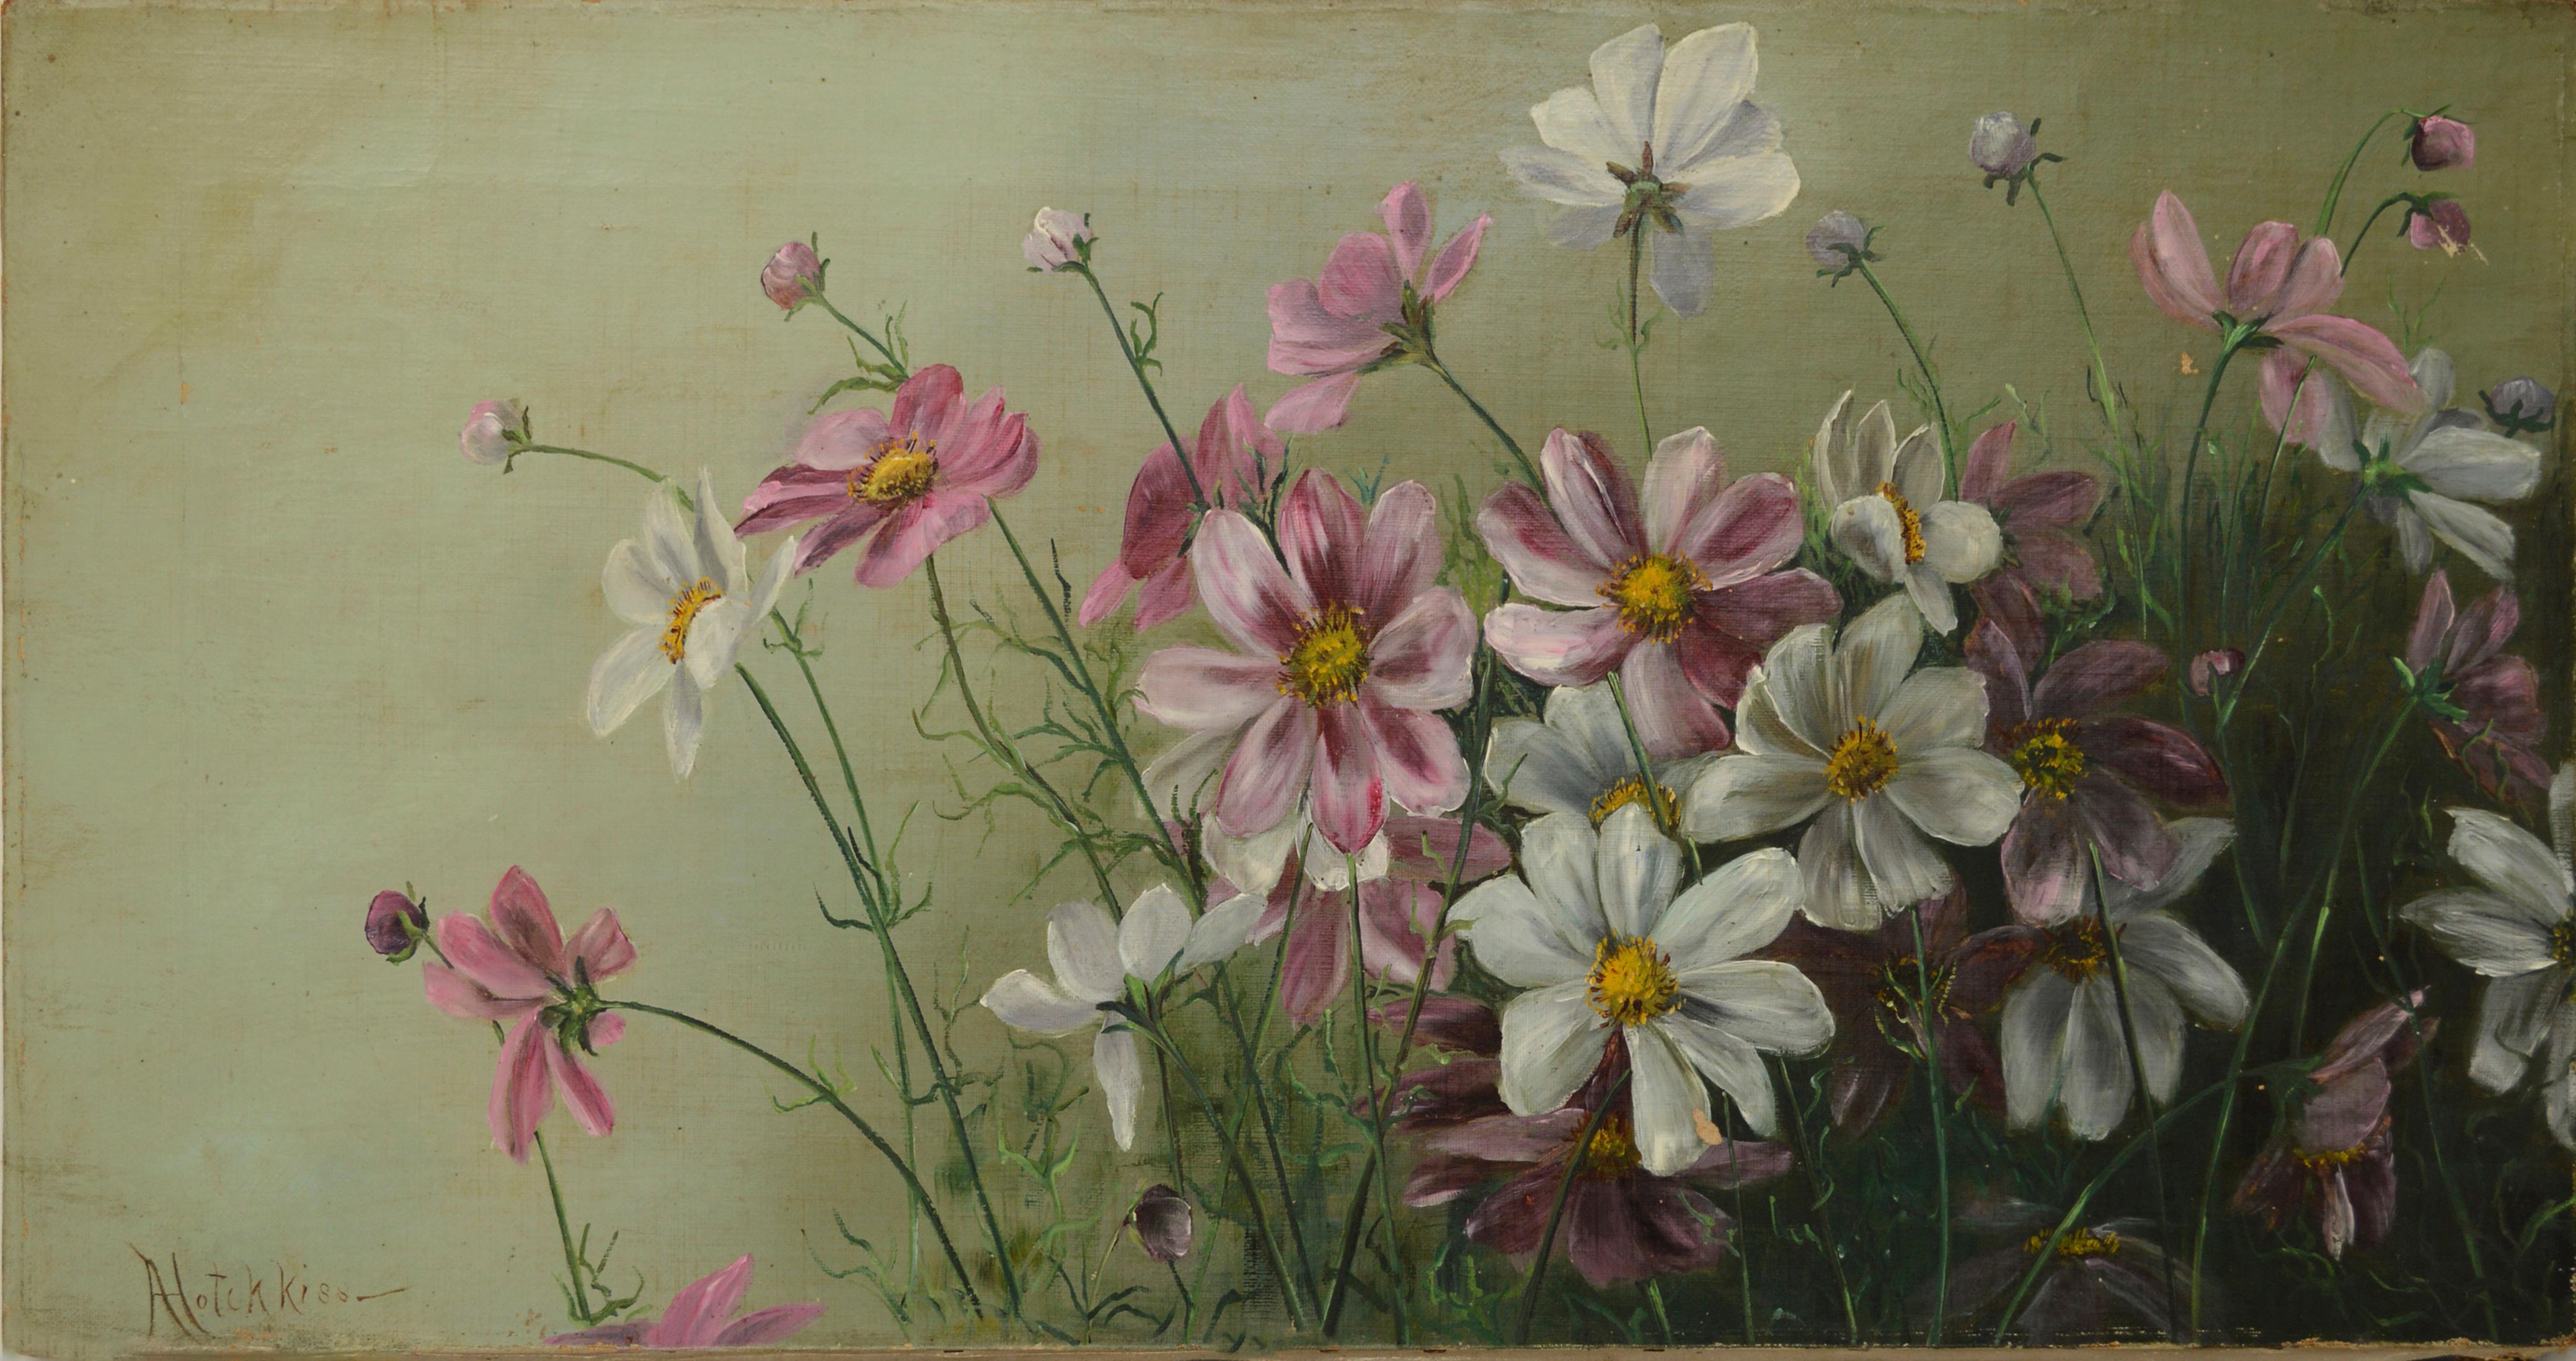 A Hotchkiss Still-Life Painting - Cosmos Flowers Victorian Era by A. Hotchkiss 1890s